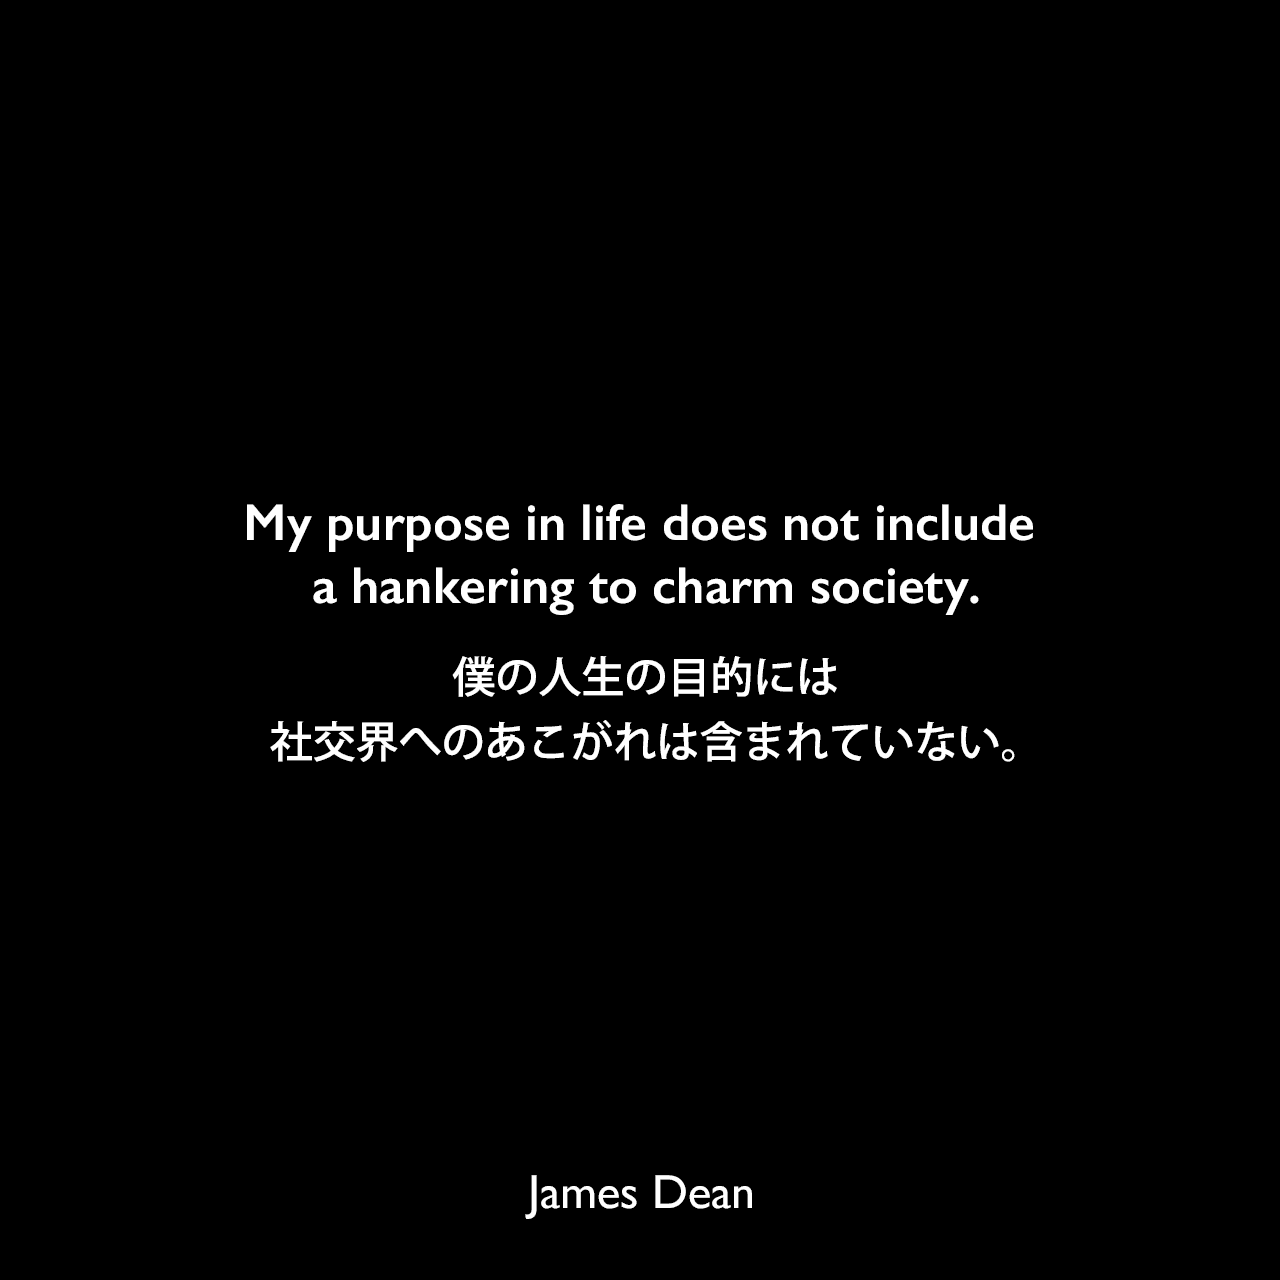 My purpose in life does not include a hankering to charm society.僕の人生の目的には、社交界へのあこがれは含まれていない。James Dean